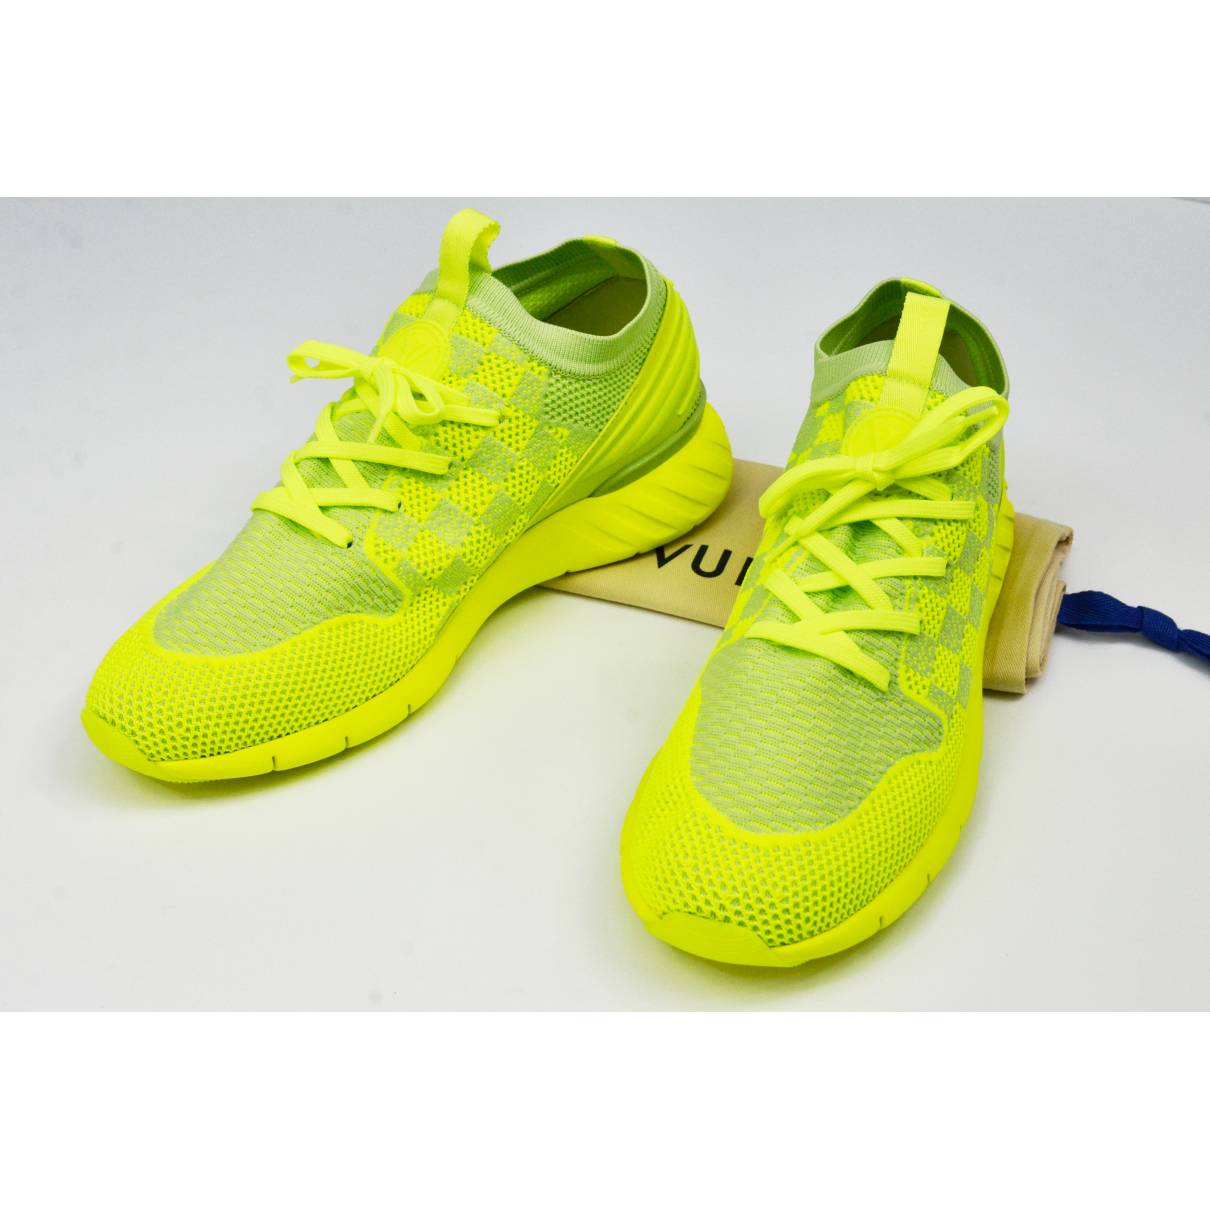 Fastlane cloth low trainers Louis Vuitton Yellow size 5 UK in